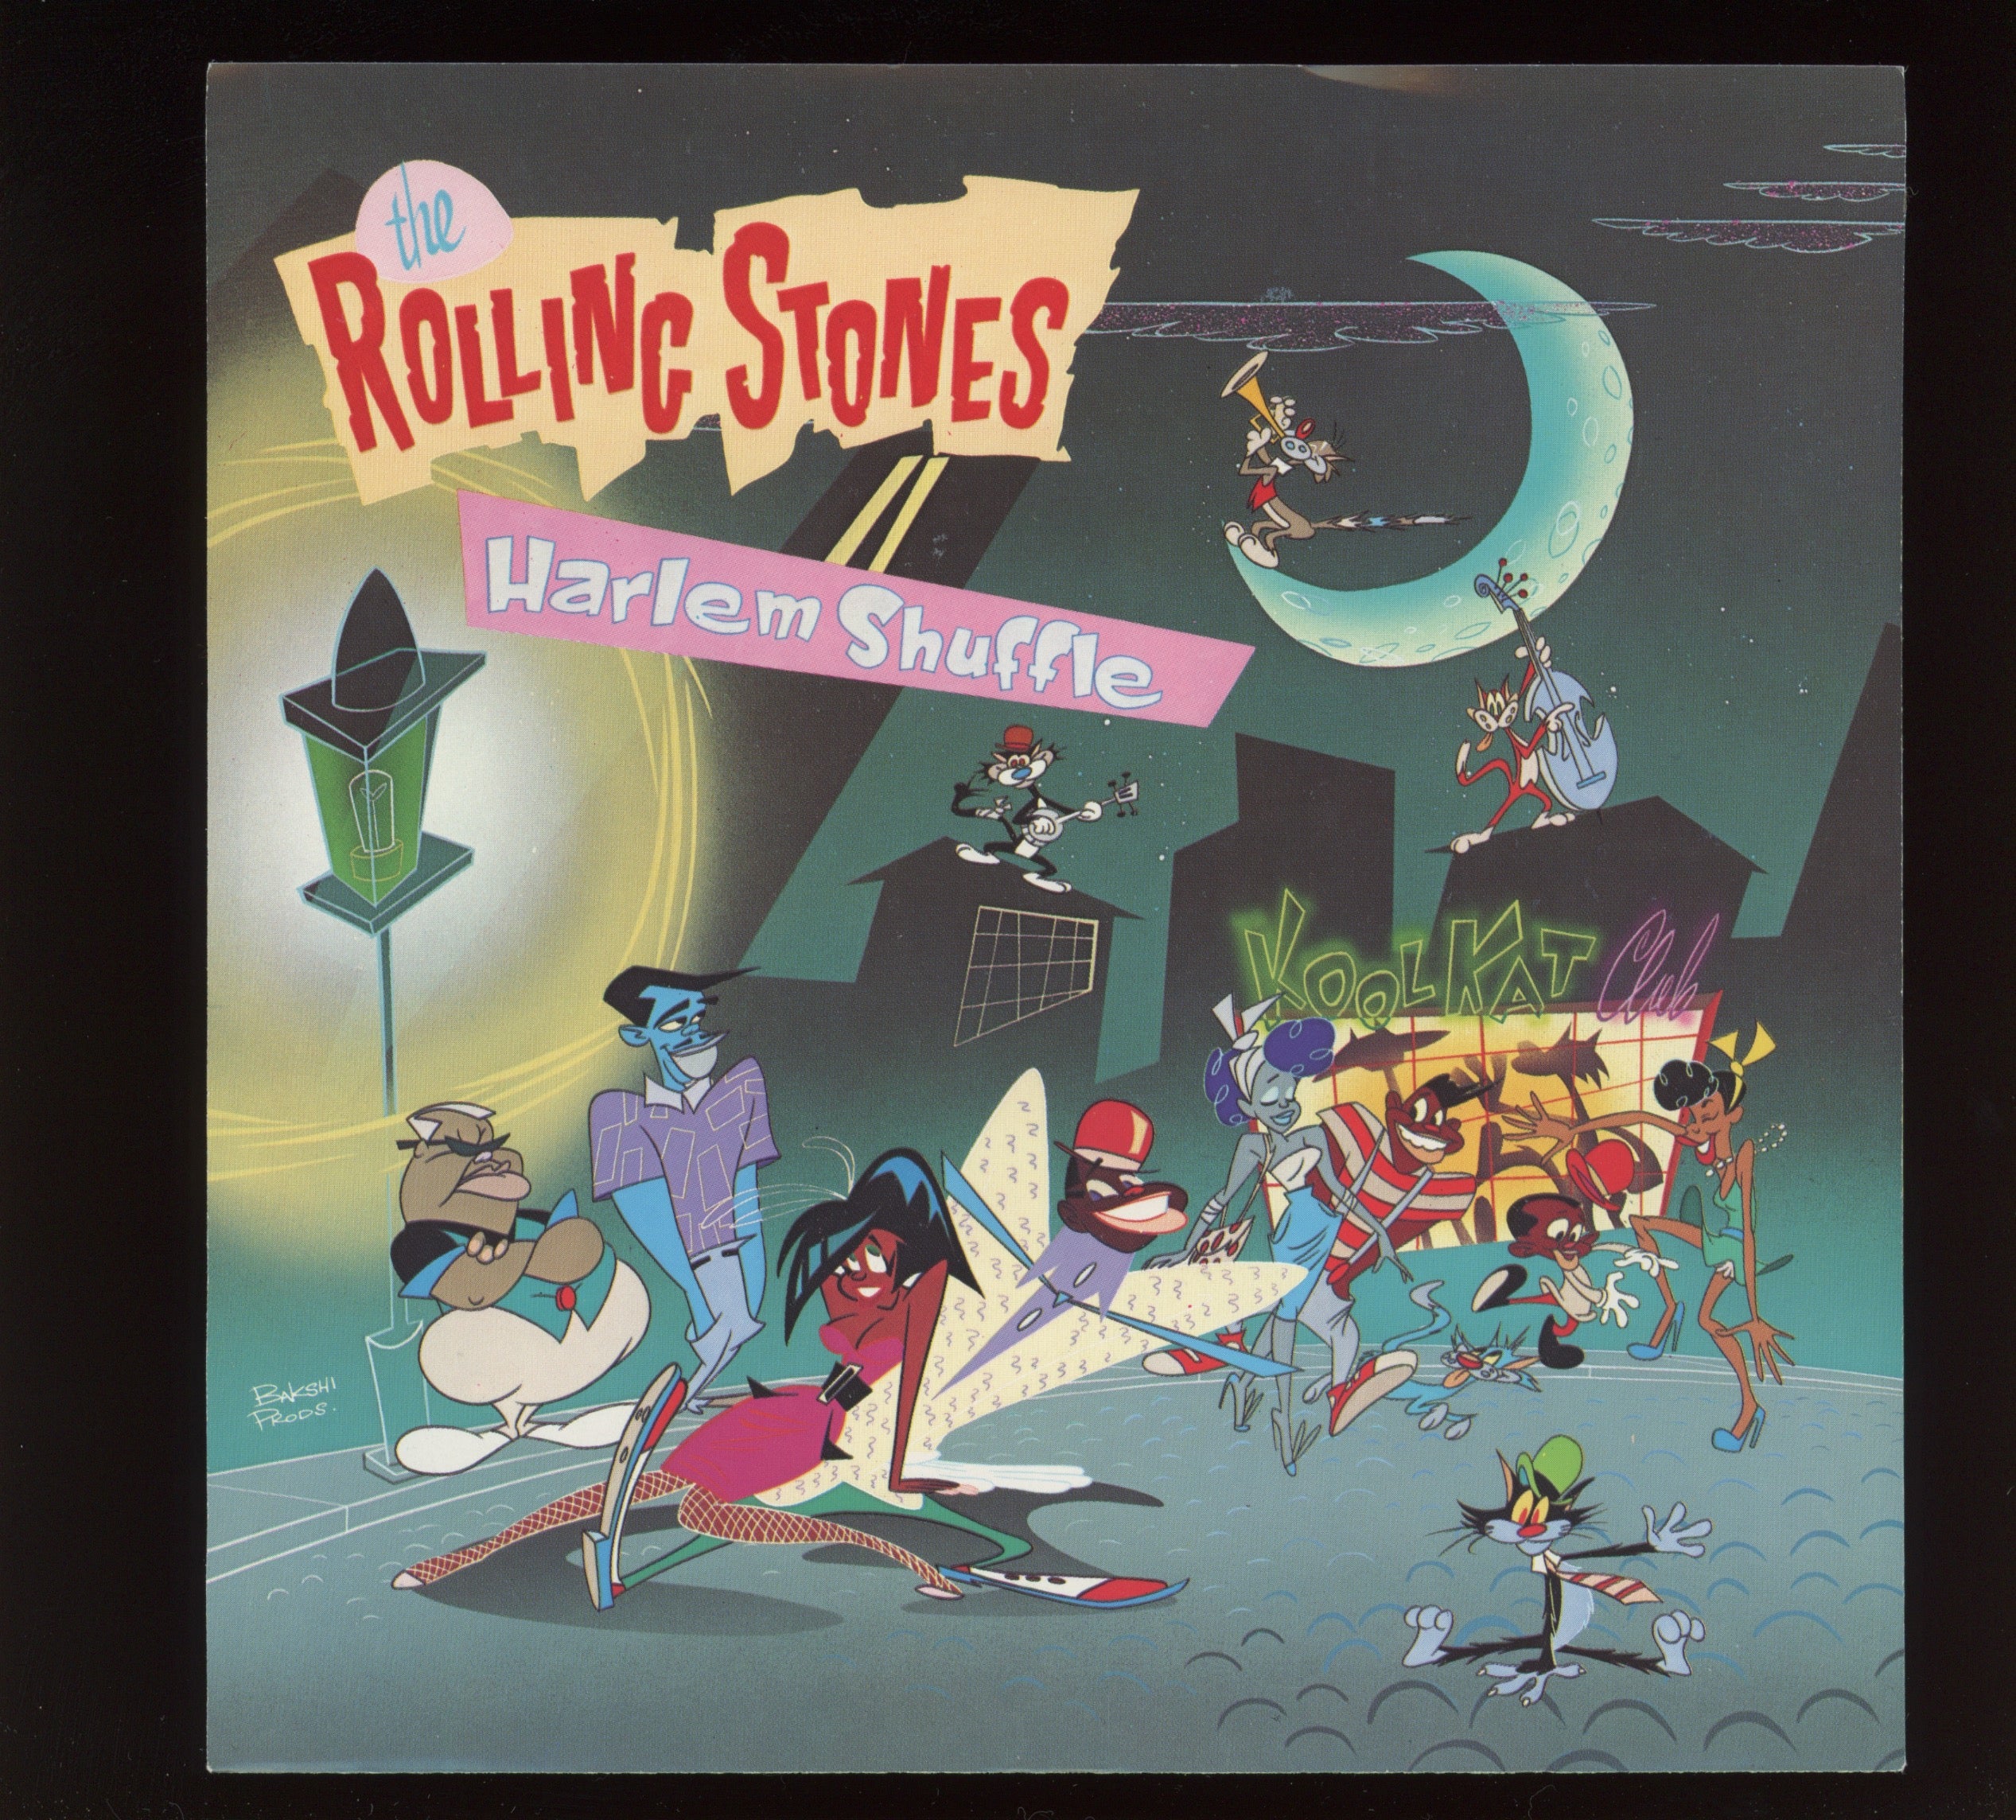 The Rolling Stones - Harlem Shuffle on Rolling Stones Records